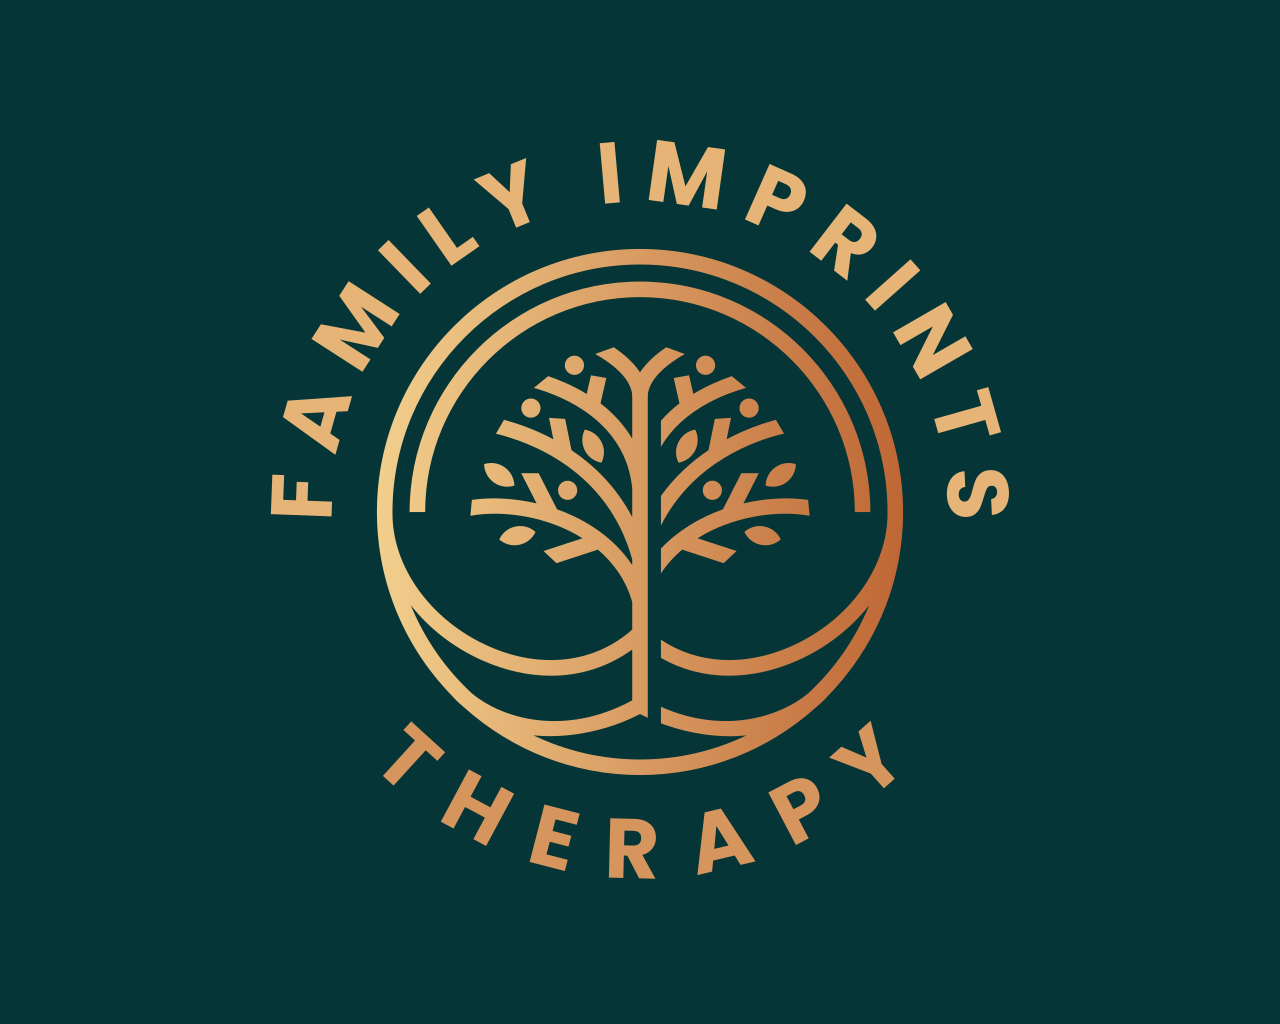 Family Imprints Therapy